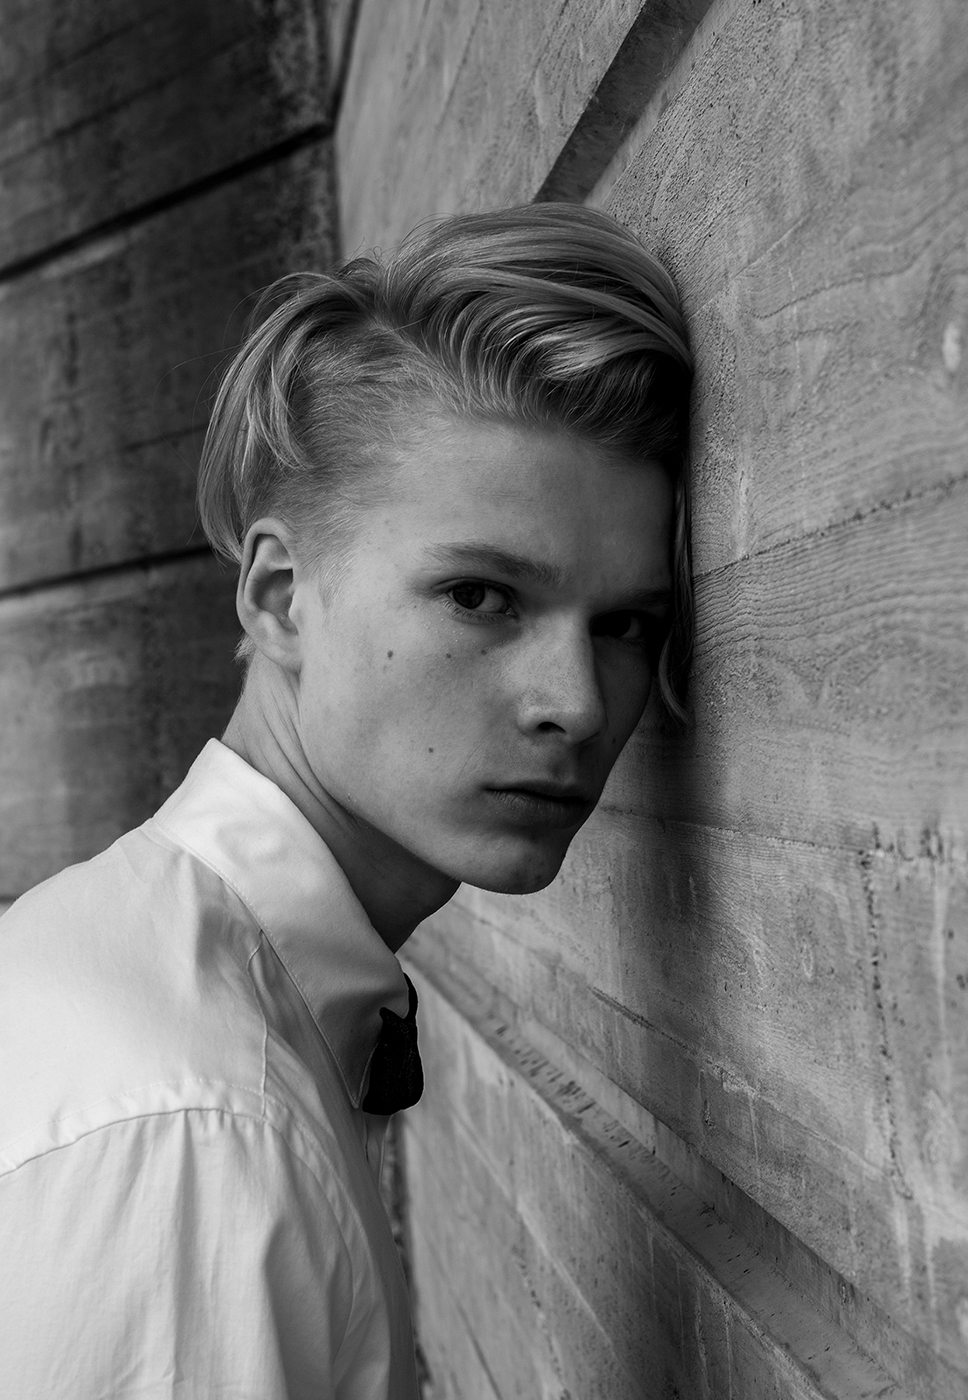 A black and white portrait of a young man leaning his head to a wall